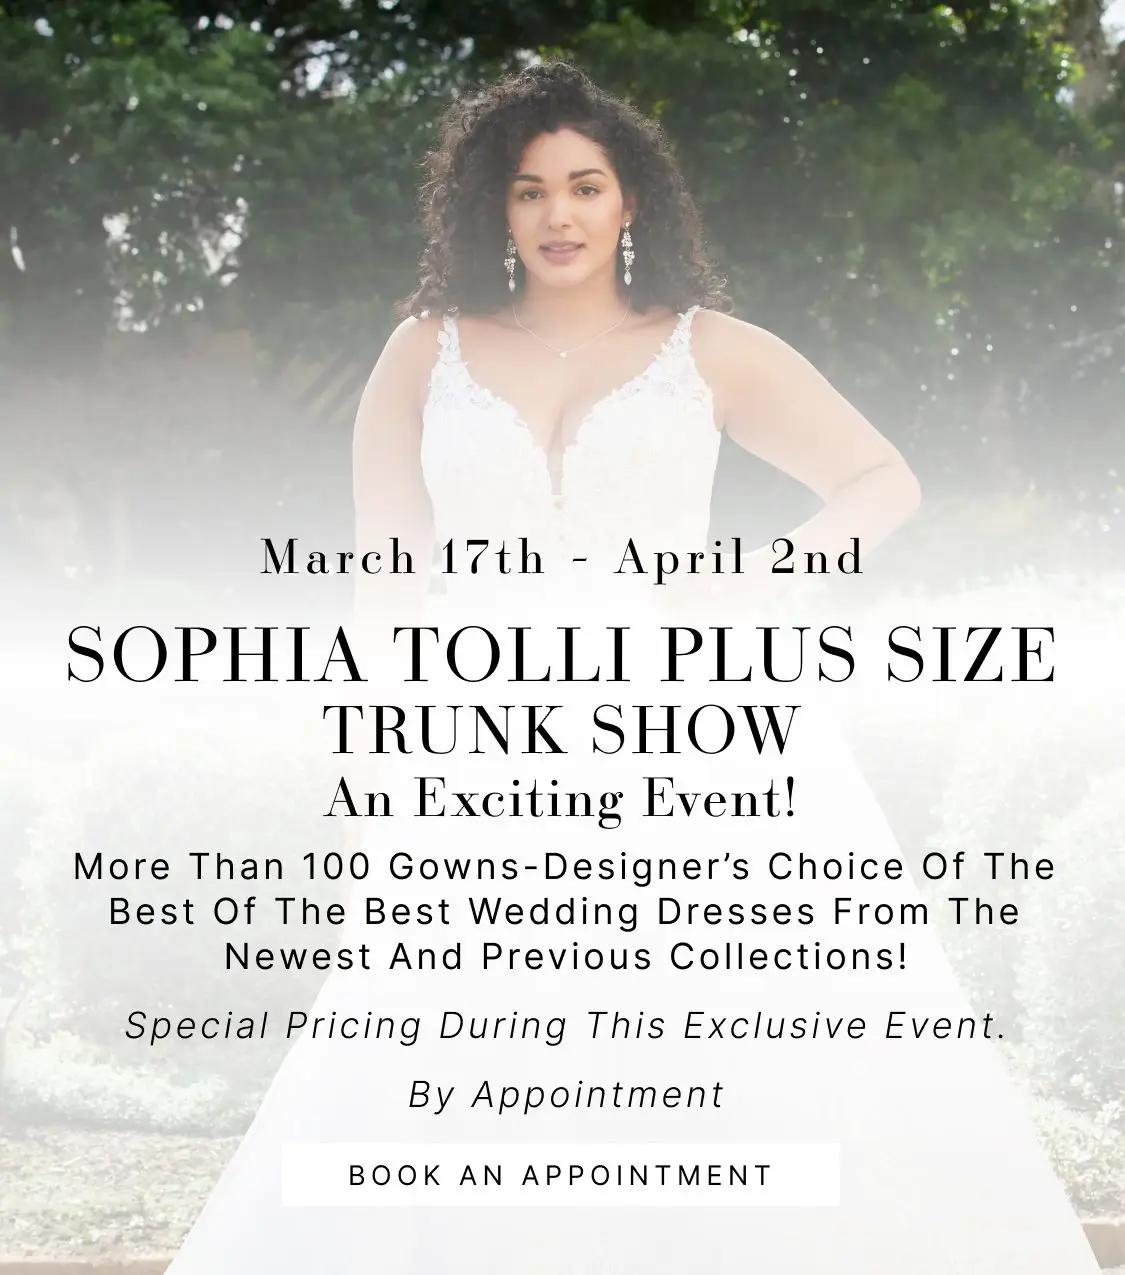 "Sophia Tolli Plus Size Trunk Show" banner for mobile